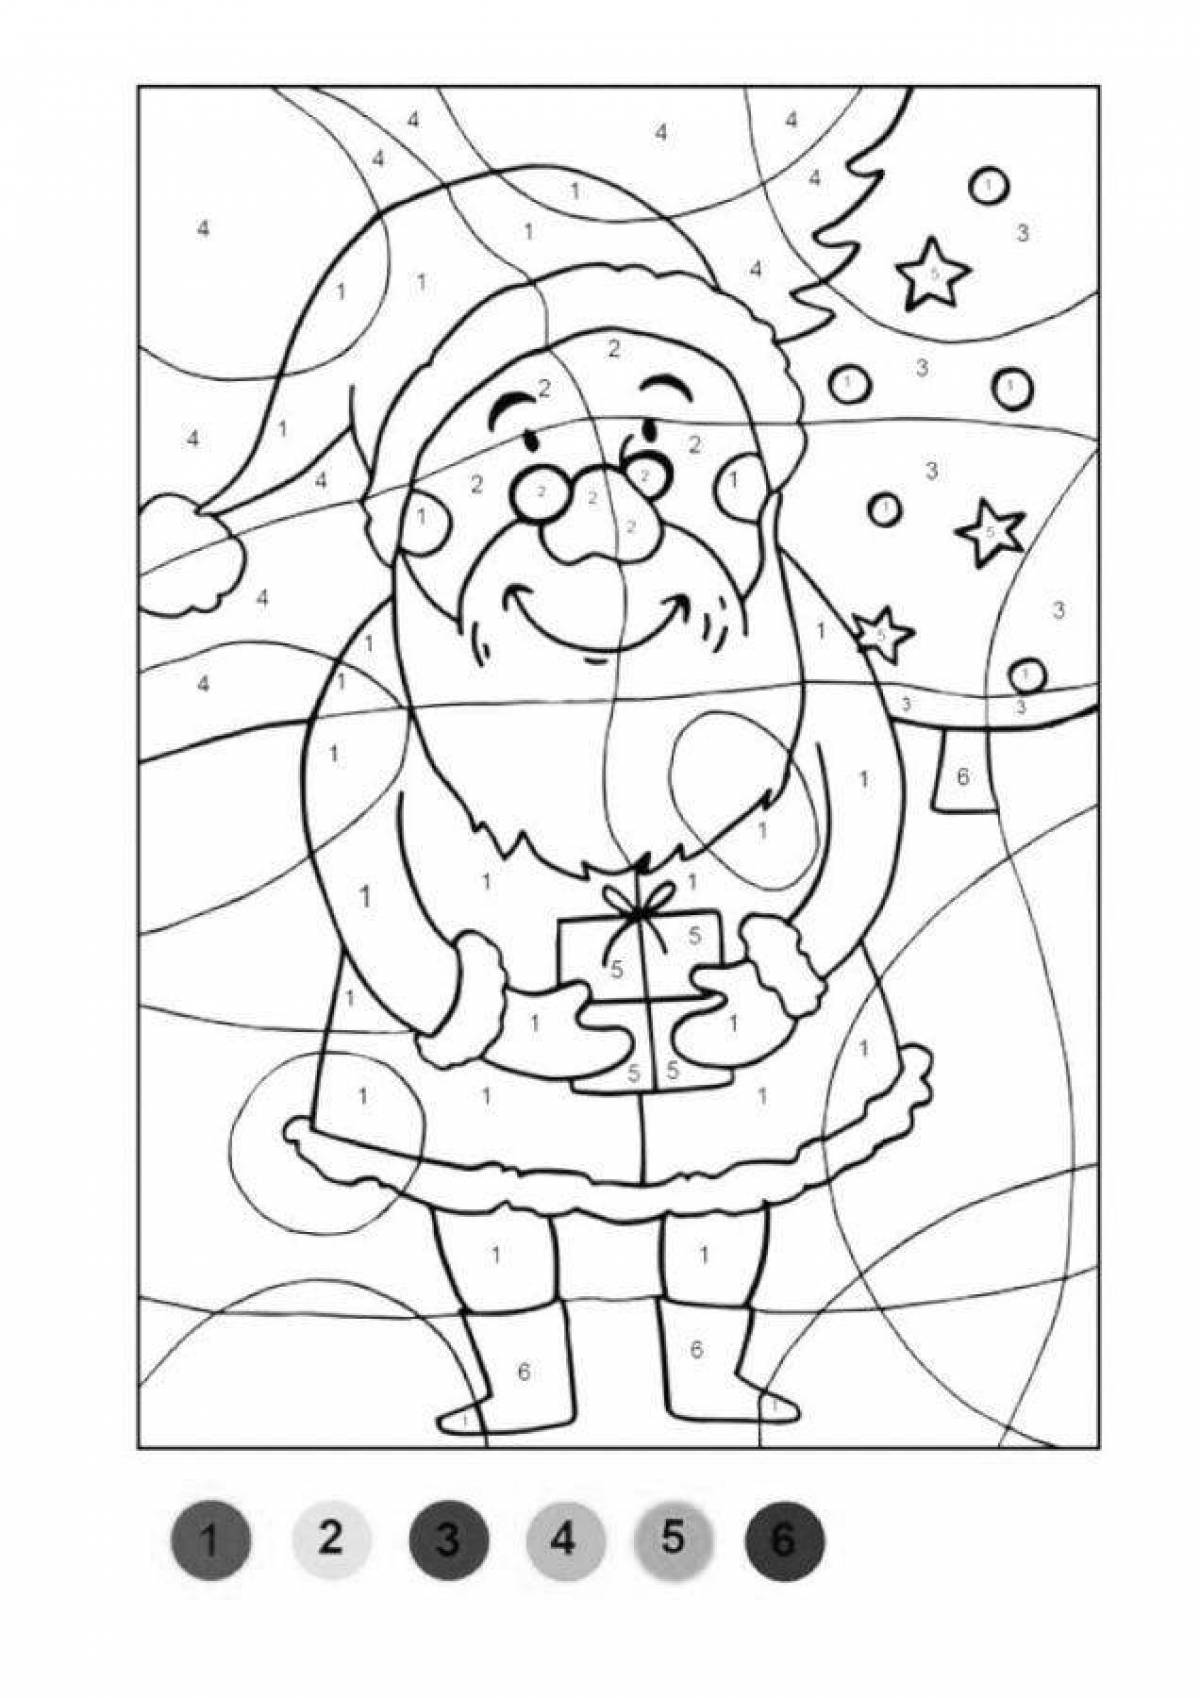 Glamorous new year coloring book in numbers